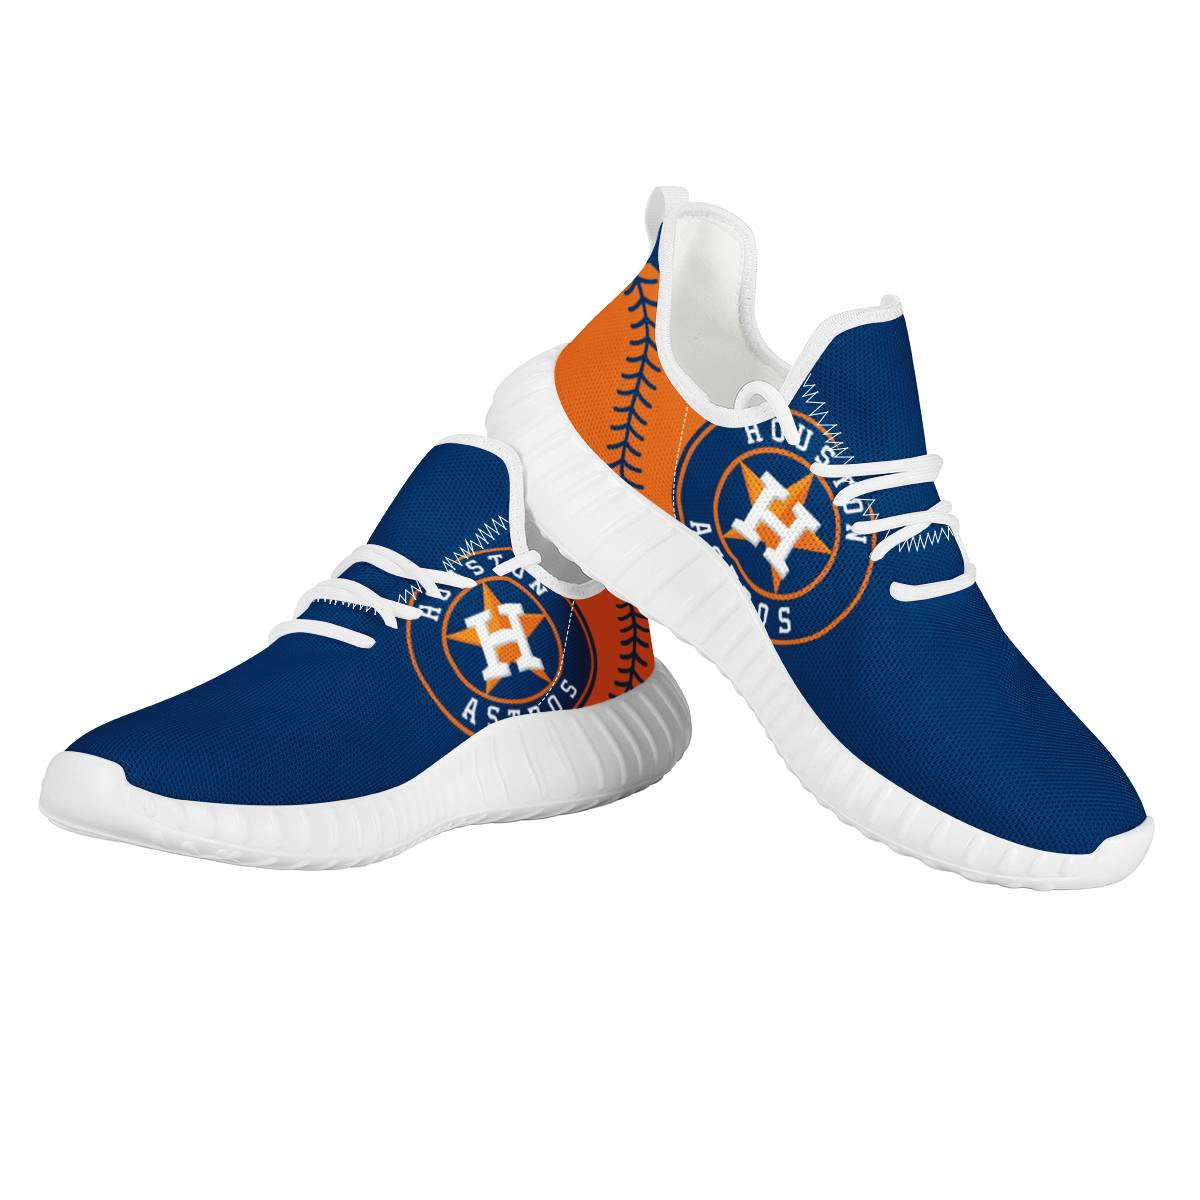 Women's MLB Houston Astros Mesh Knit Sneakers/Shoes 002